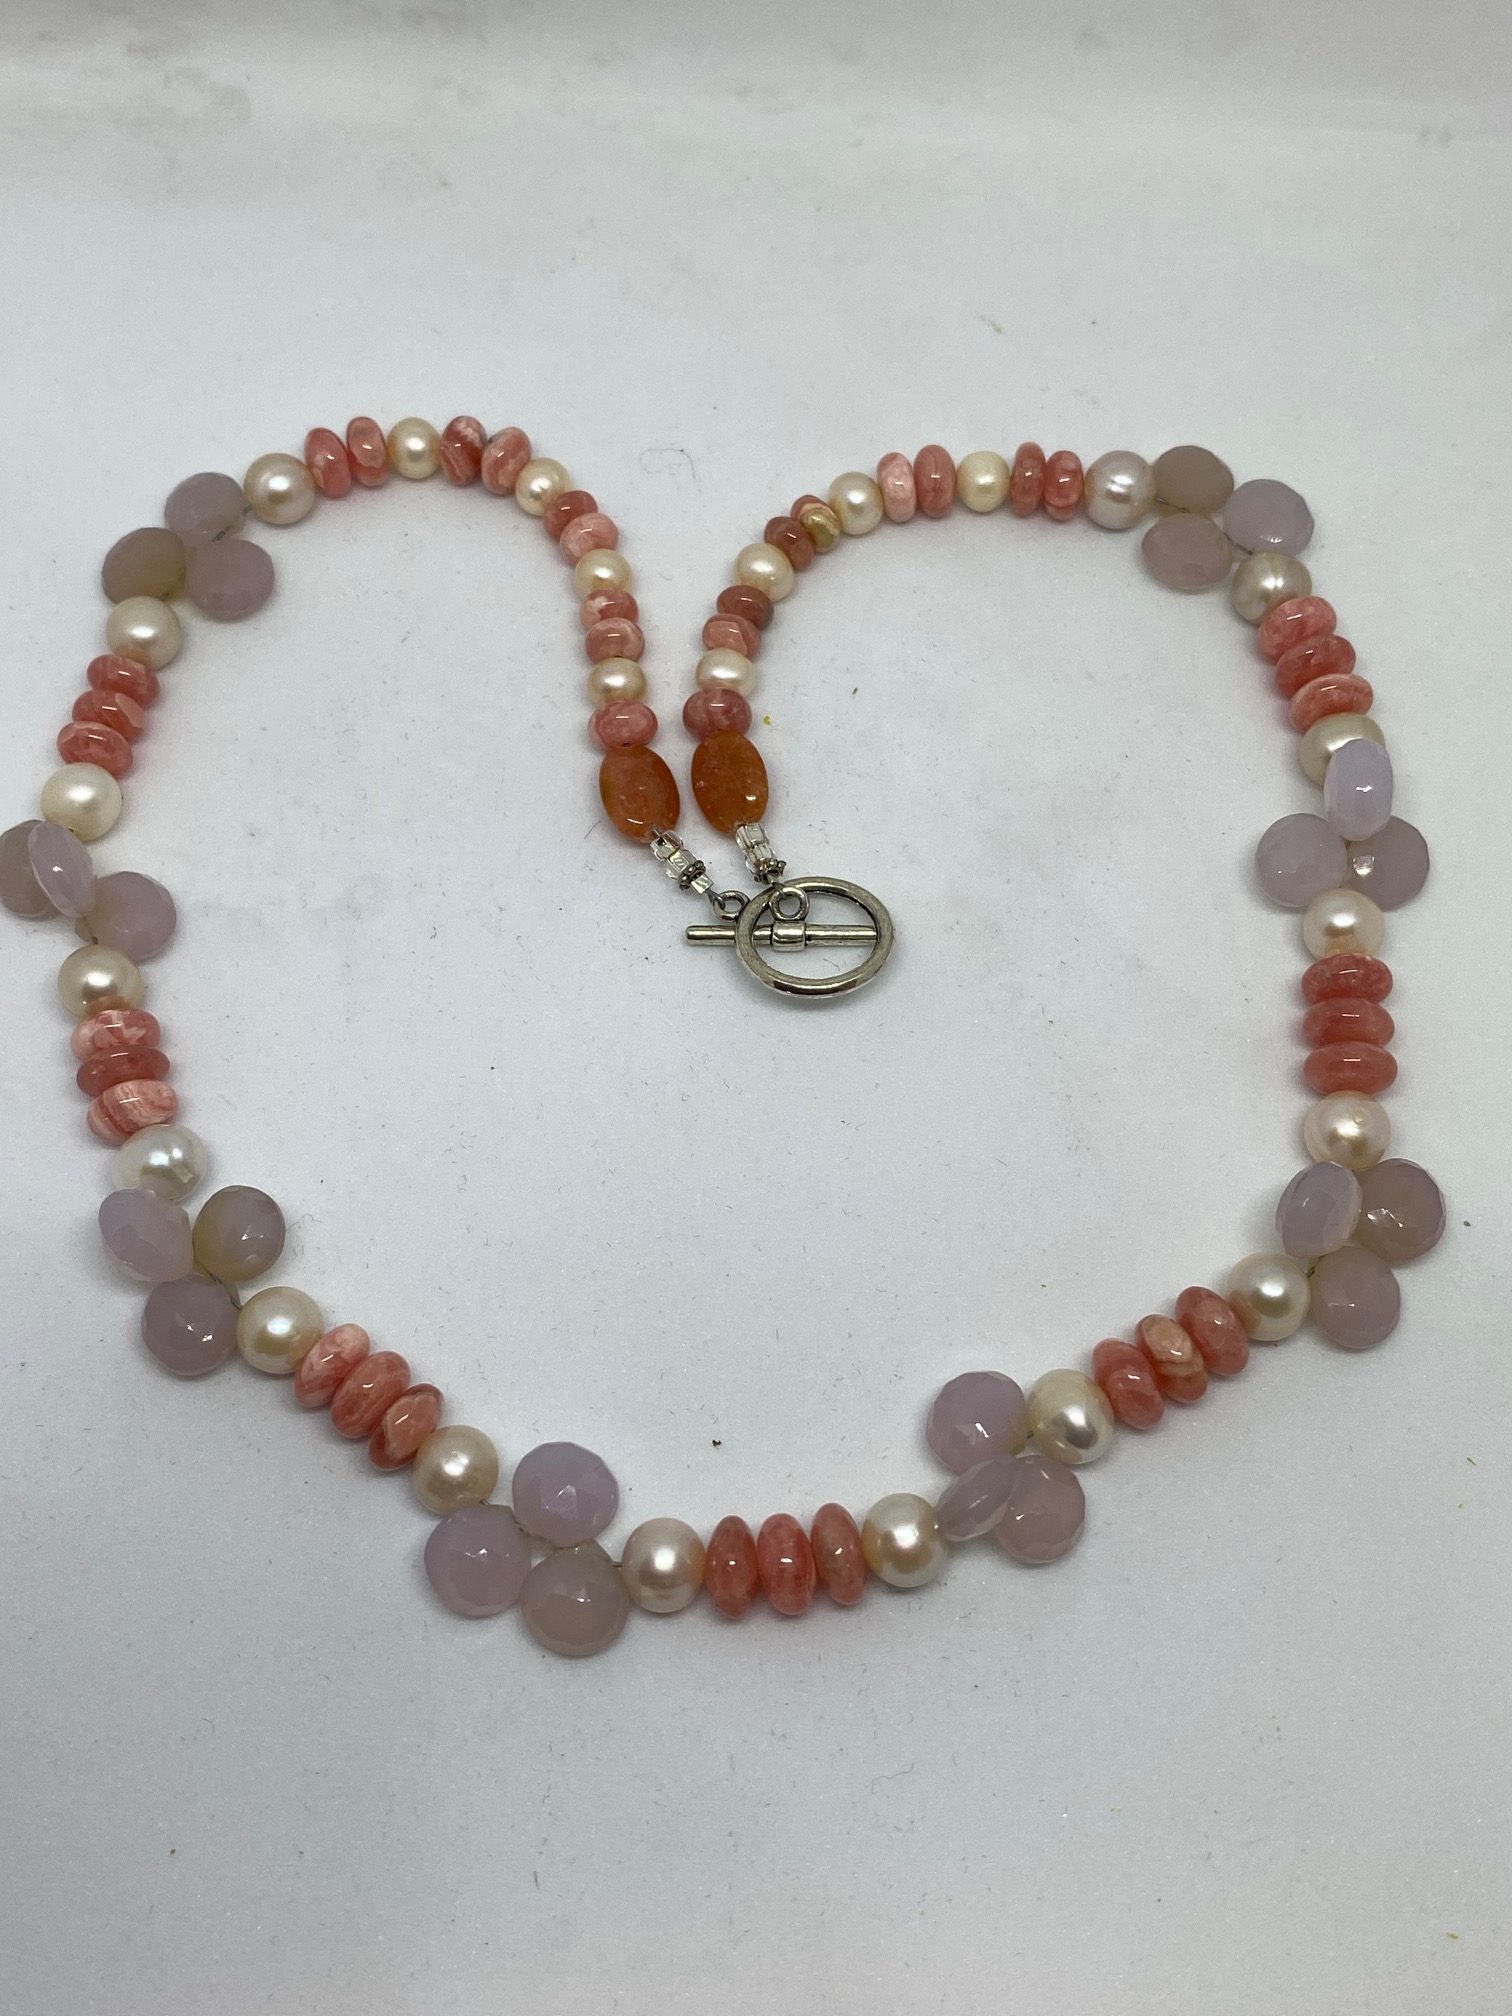 Rhodochrosite, Pearl, and Blue Chalcedony Necklace This necklace supports Joy, Integrity, and Goodwill. 